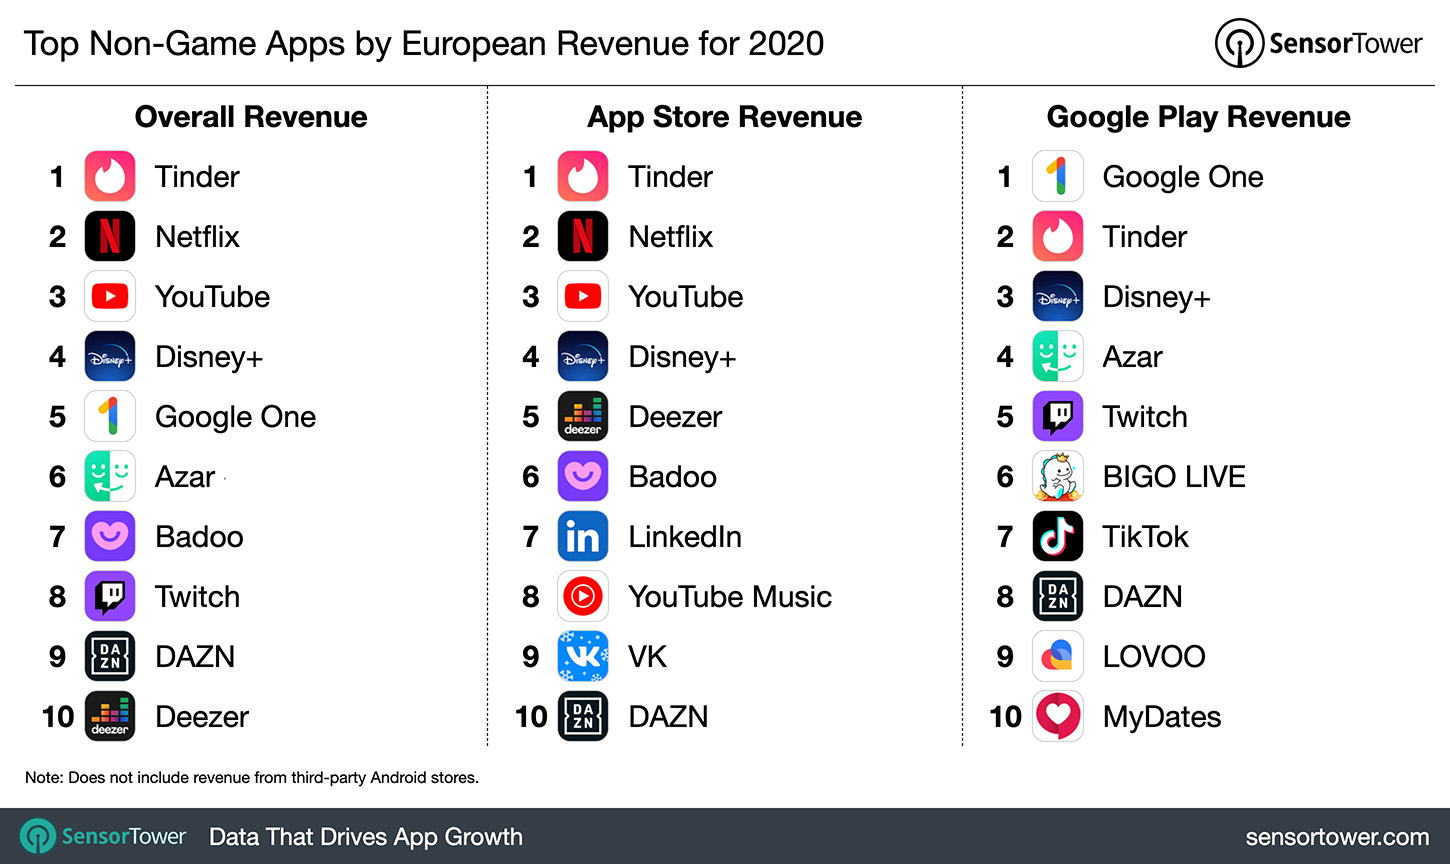 Top Non-Game Apps by European Revenue for 2020